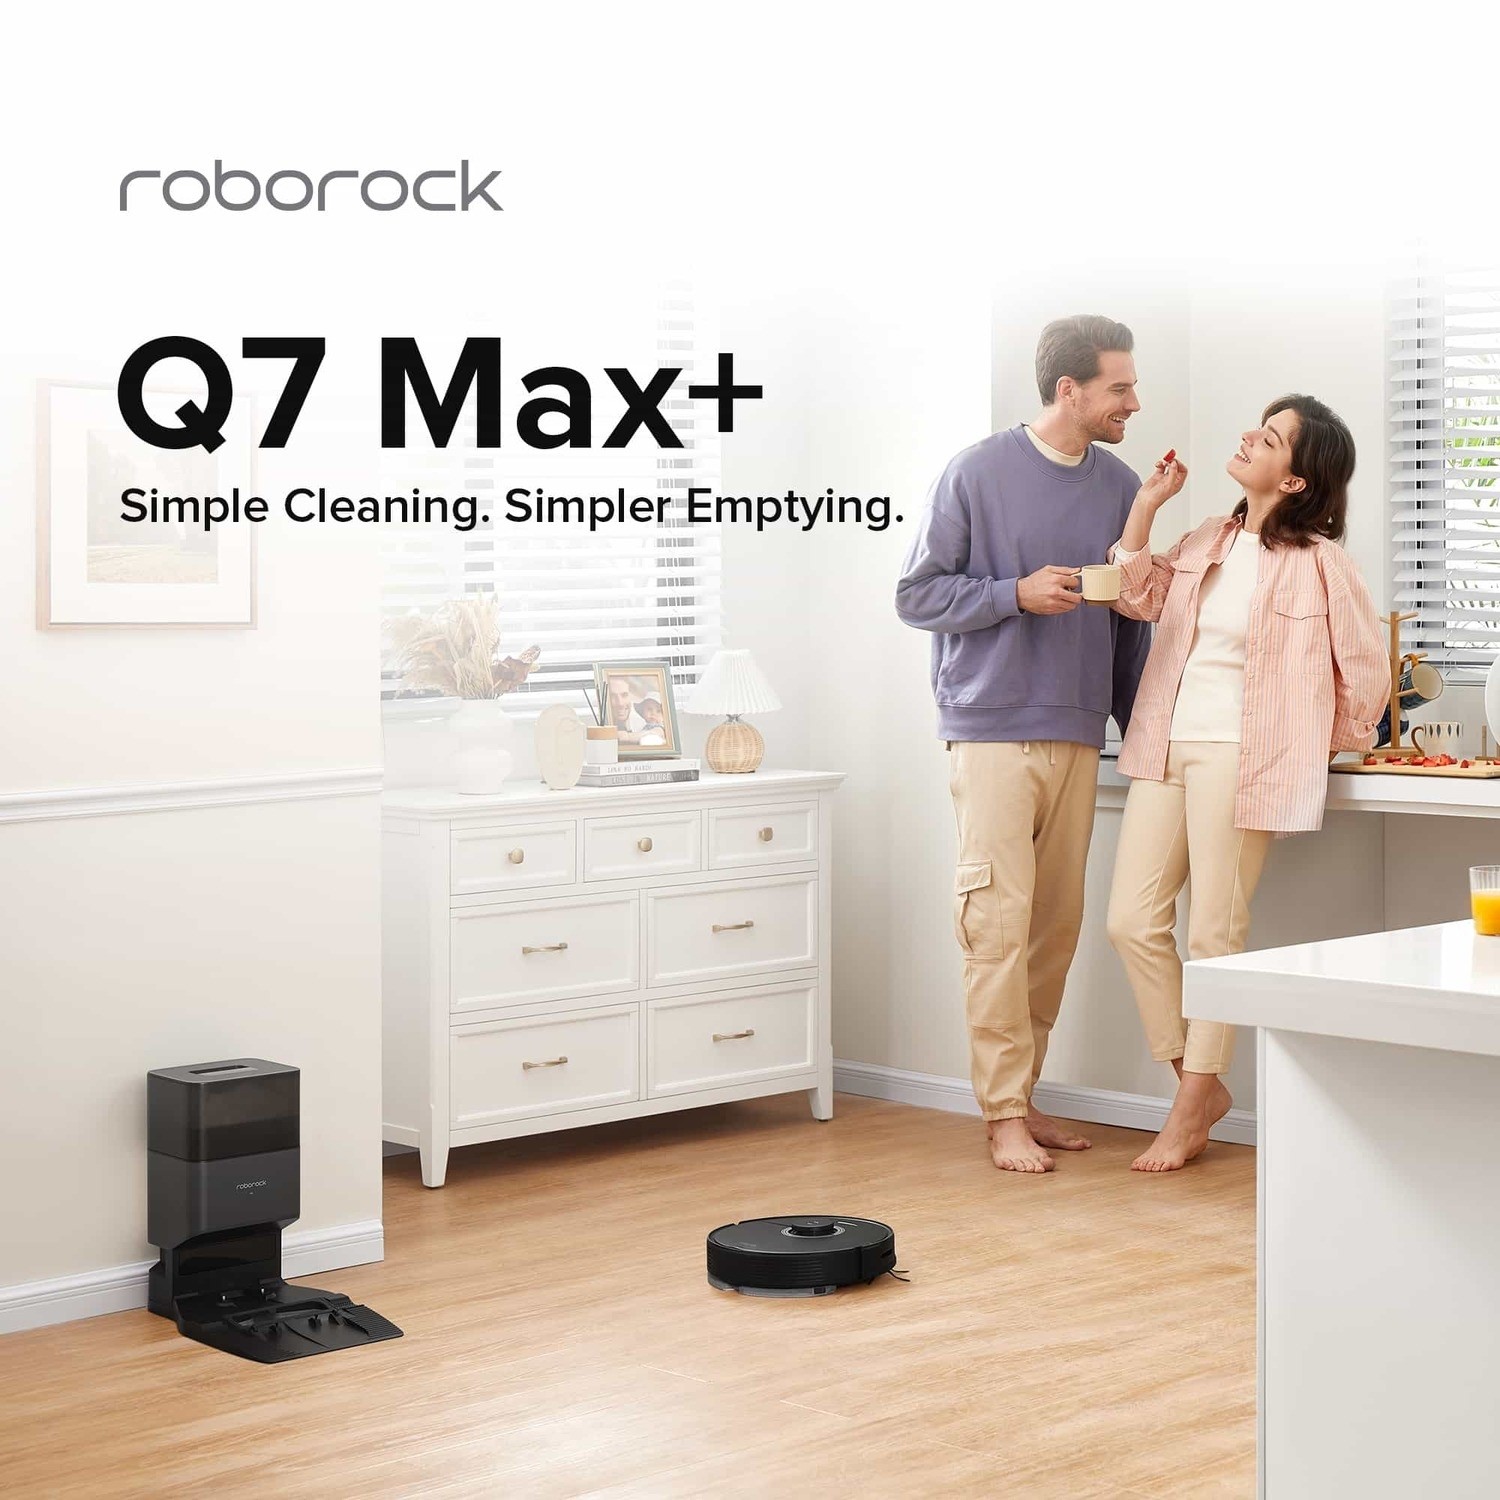 Roborock Q7 Max Series - Simple Cleaning. Simpler Emptying.